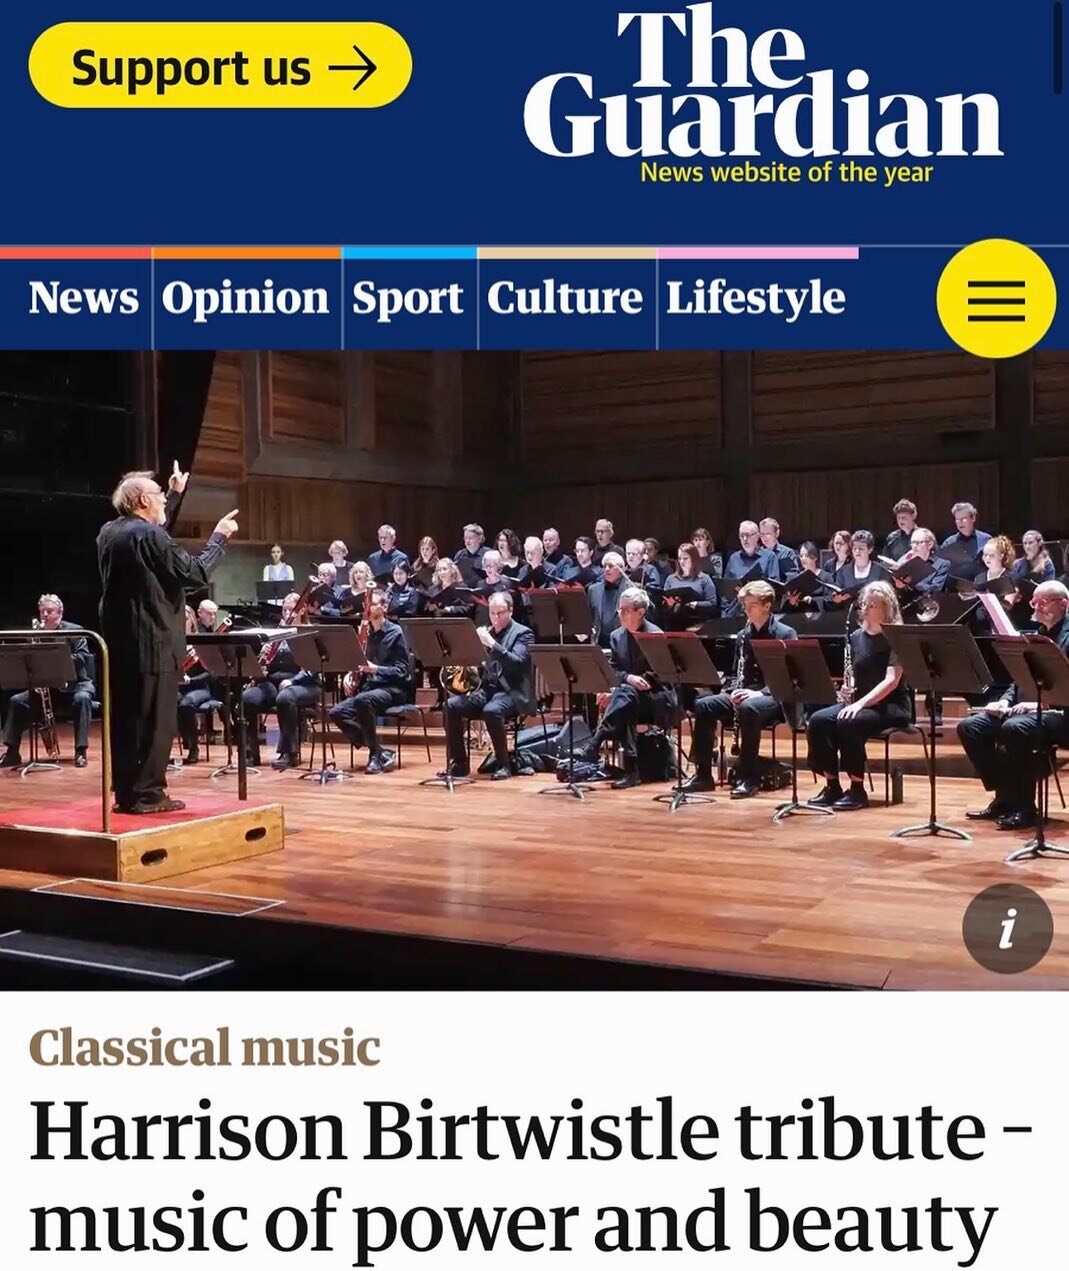 A &ldquo;pinch me&rdquo; moment&hellip;Head to the link in my bio to read the full review from the @guardian on Sunday&rsquo;s side-by-side concert with @london.sinfonietta and @royalacademyofmusic in tribute to Sir Harrison Birtwistle